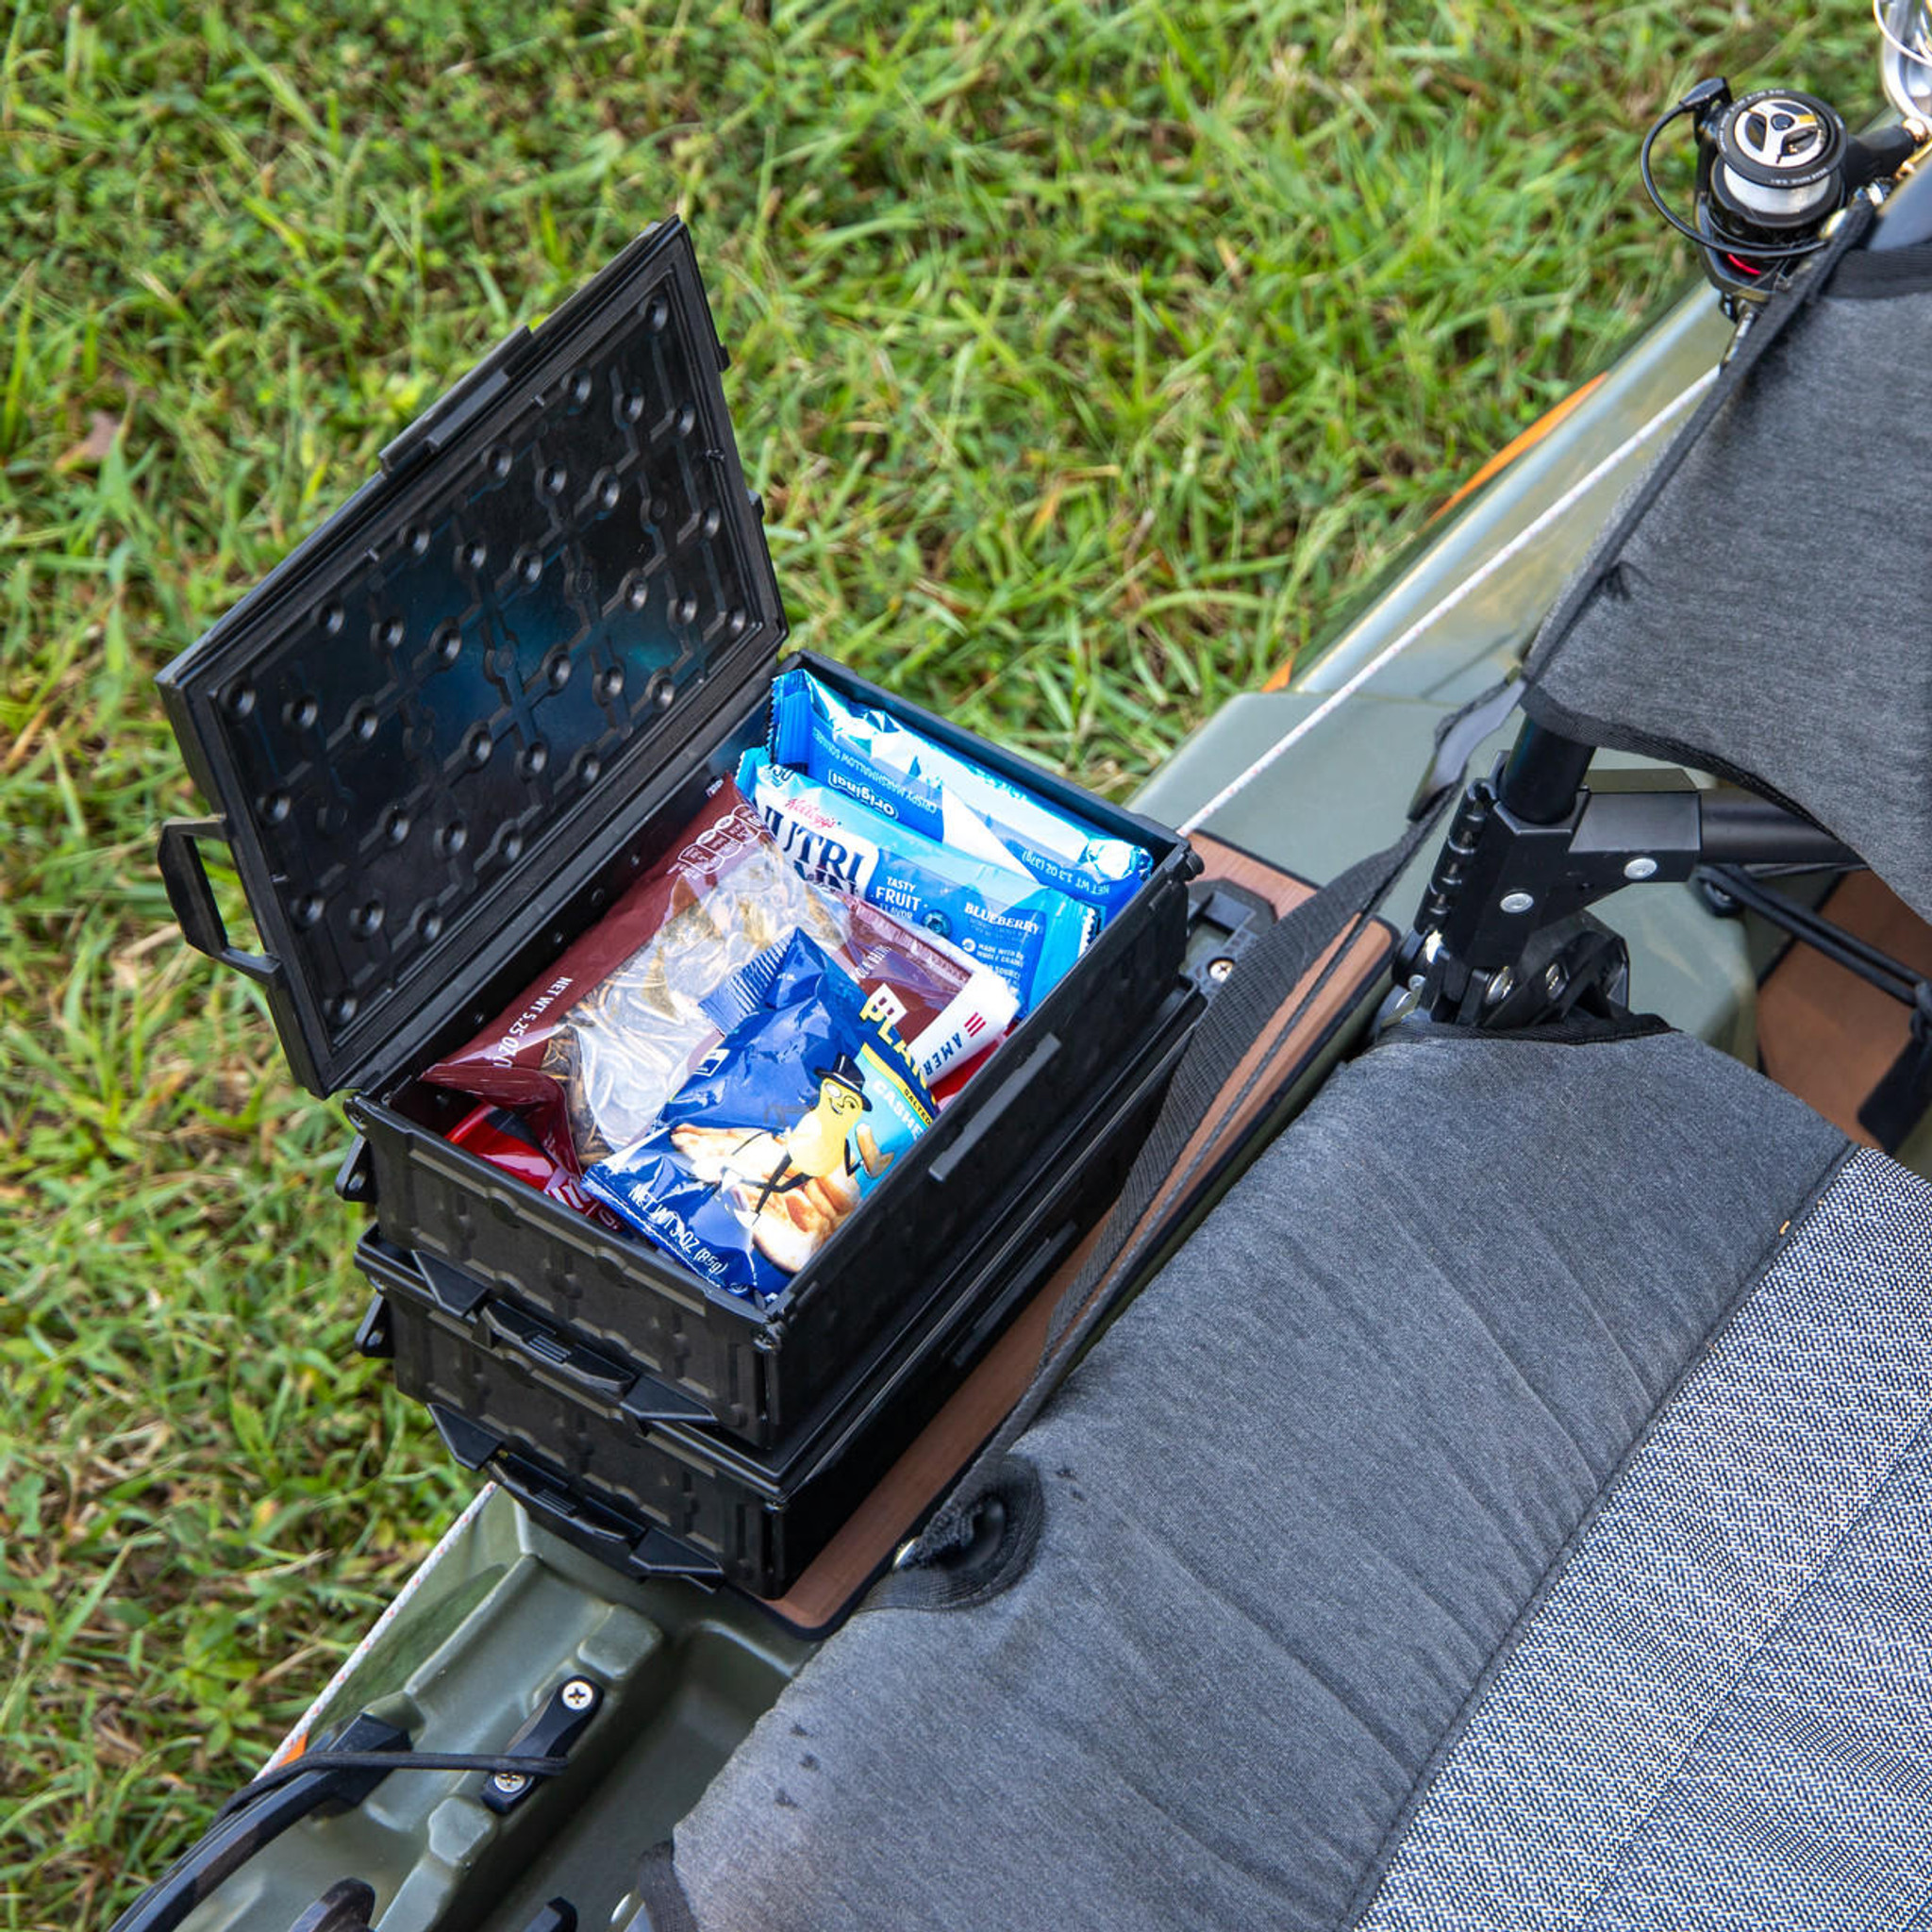 TracPak Combo Kit, Two Boxes and Quick Release Base